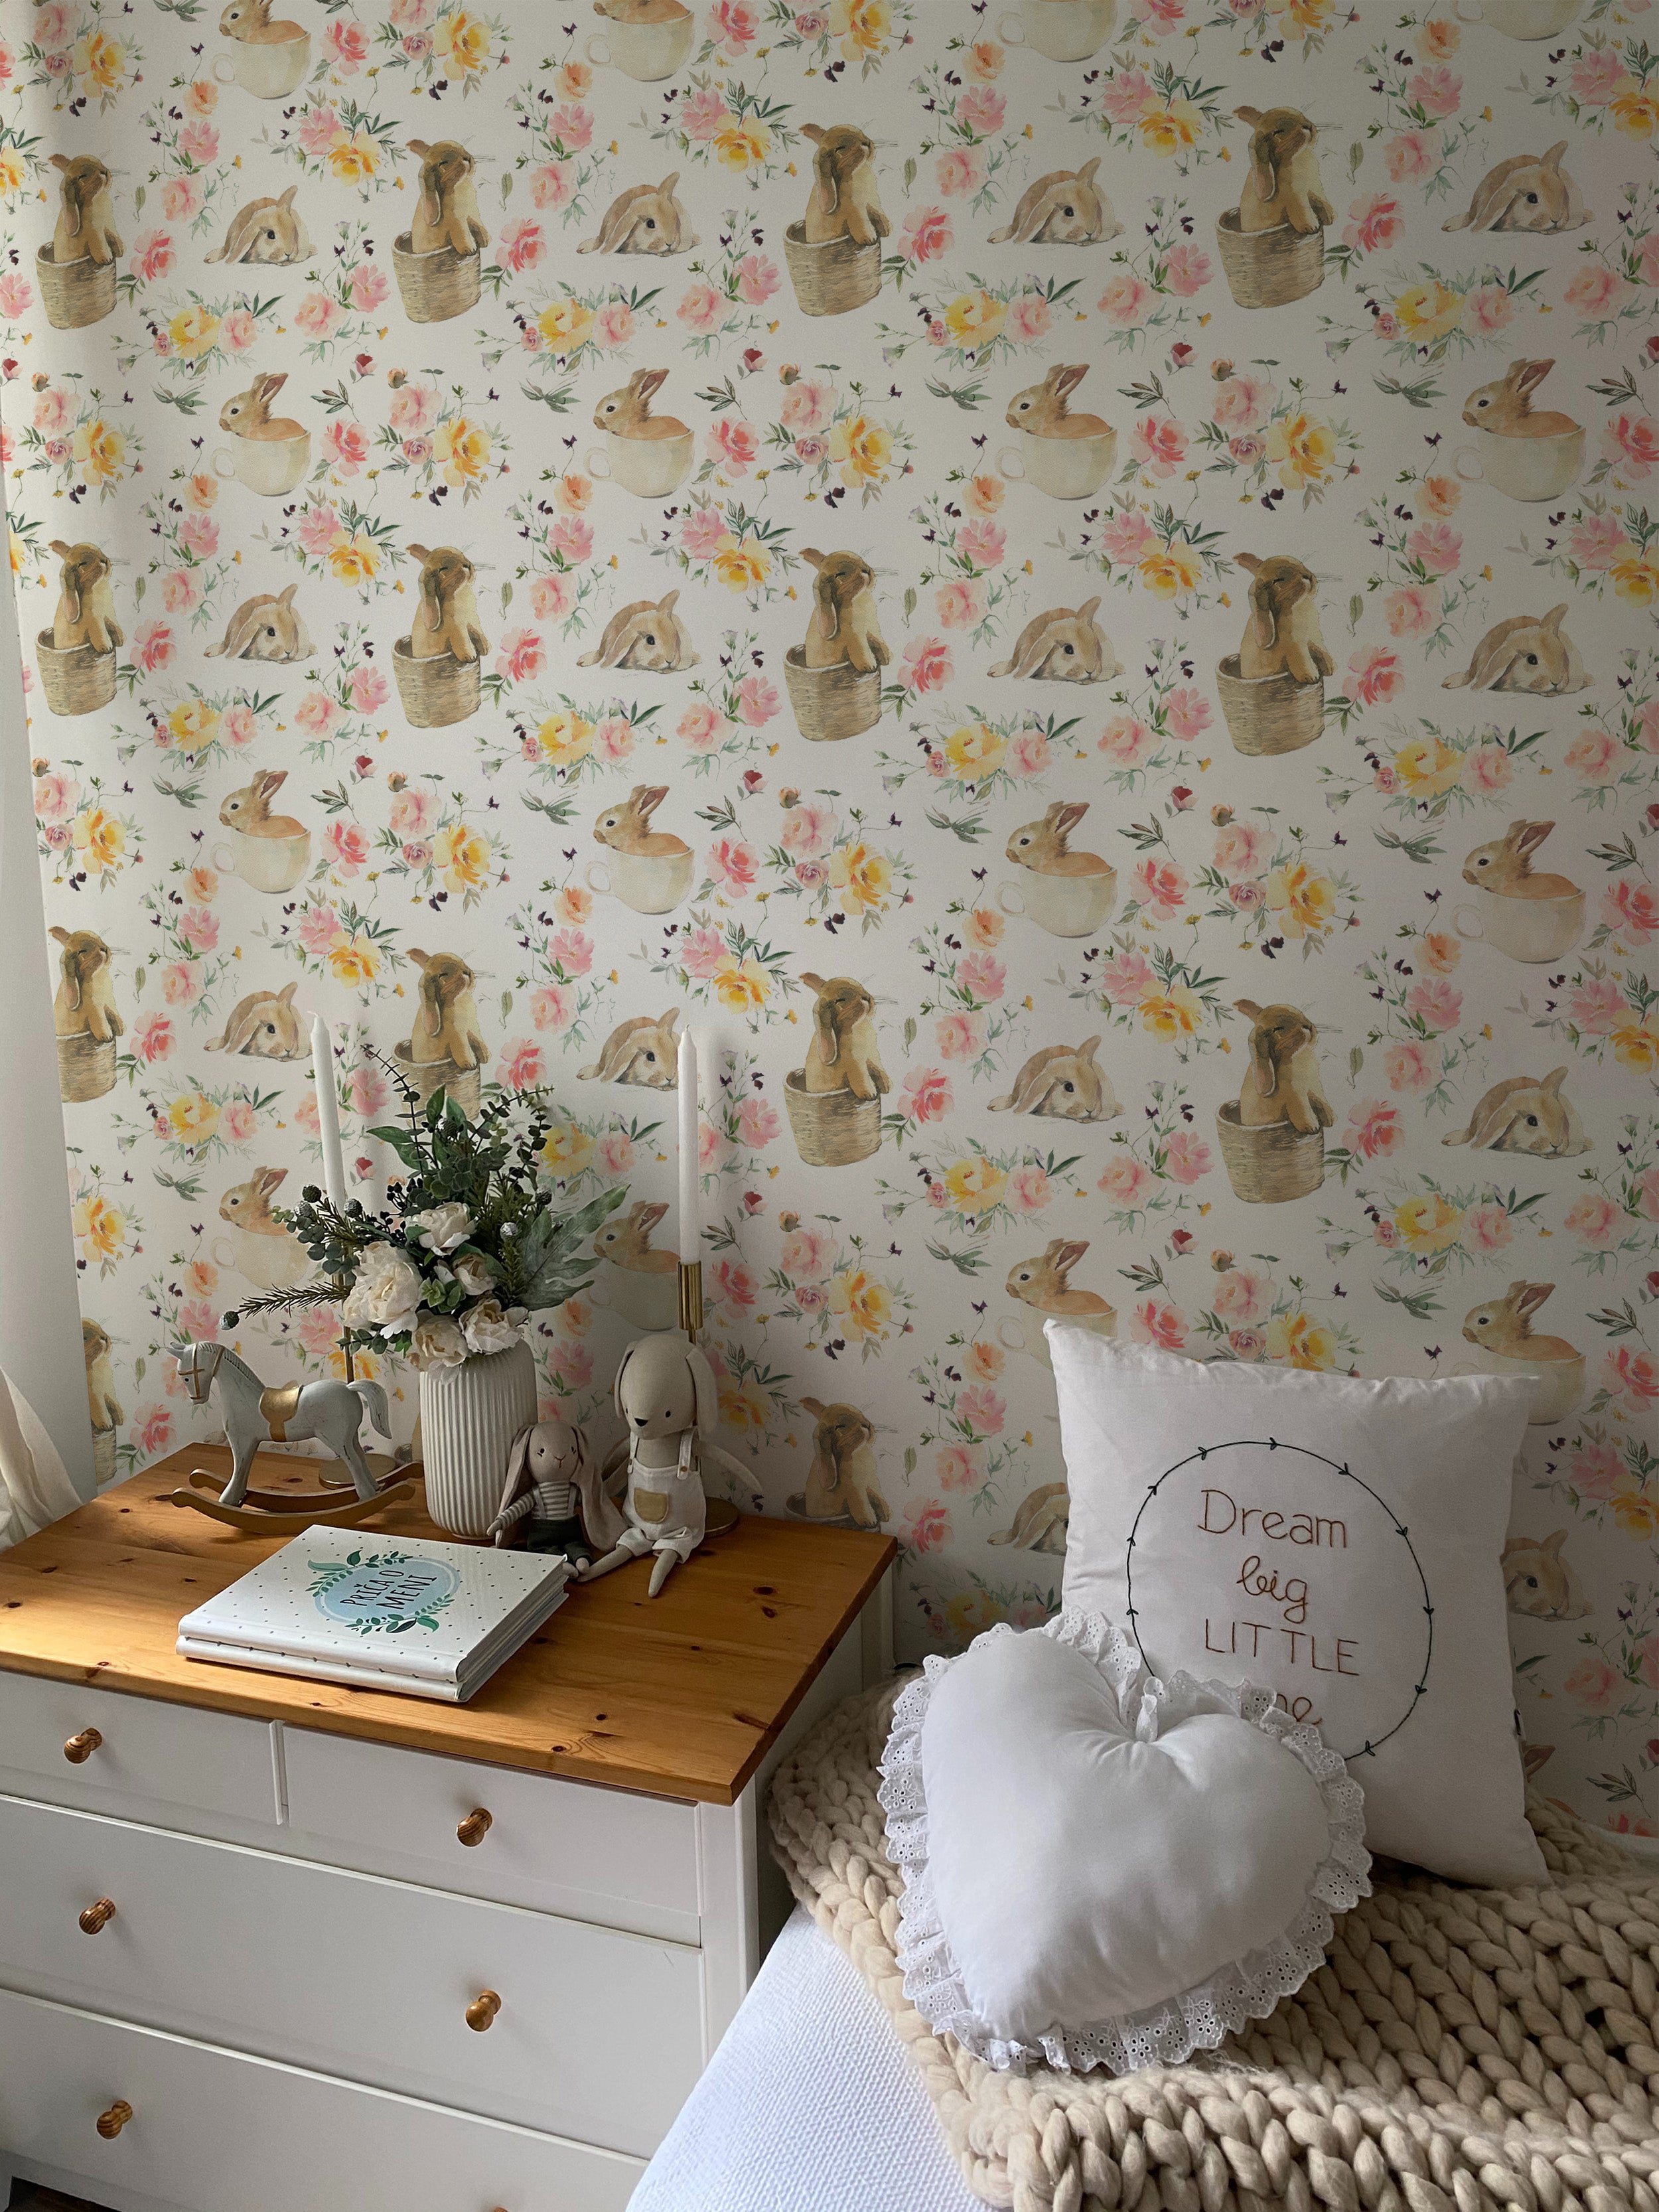 A charming child's room adorned with Garden Bunnies Wallpaper showcasing adorable rabbits and colorful flowers. The decor includes a white dresser topped with plush toys and children's books, enhancing the room's whimsical feel.